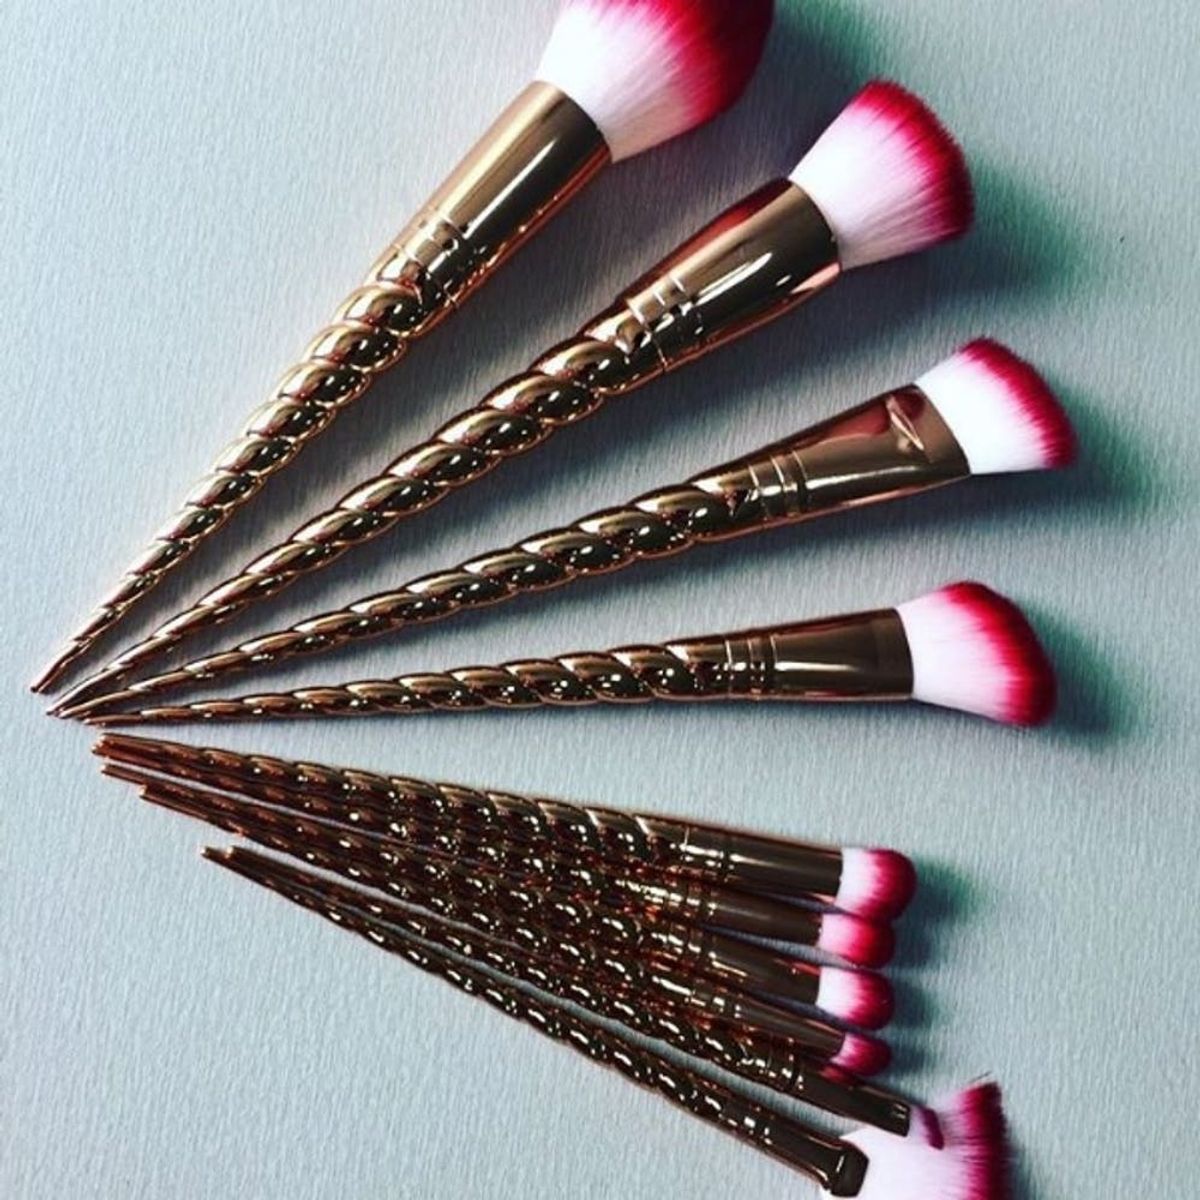 Unicorn Makeup Brushes Will Soon Come in Rose Gold